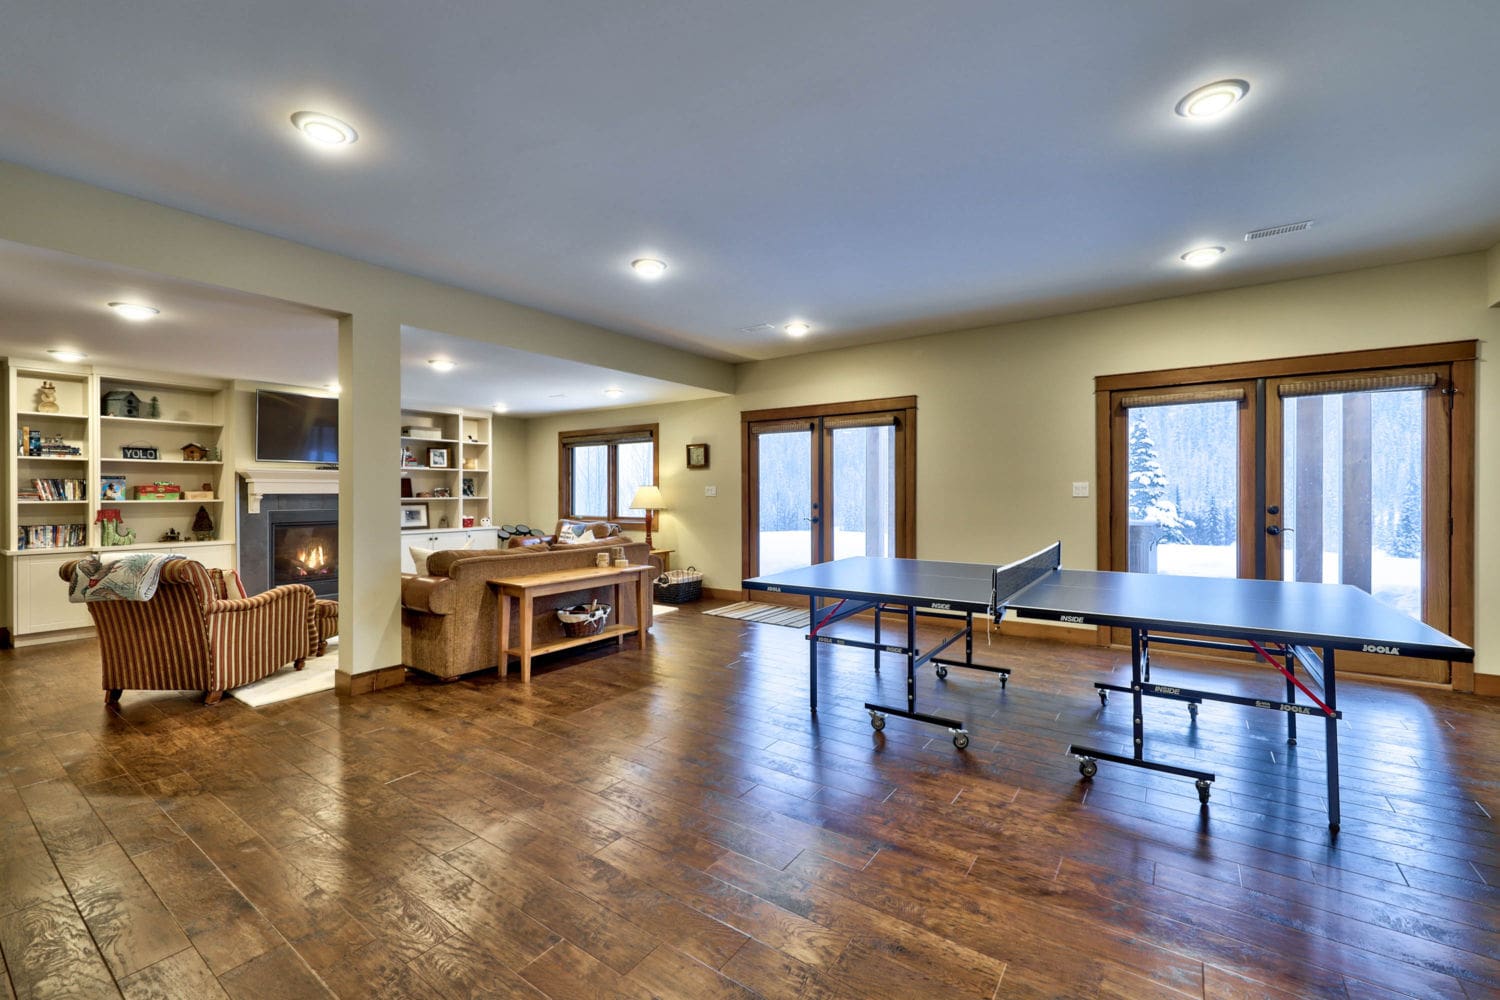 Rec-room with ping pong table in timber frame log home